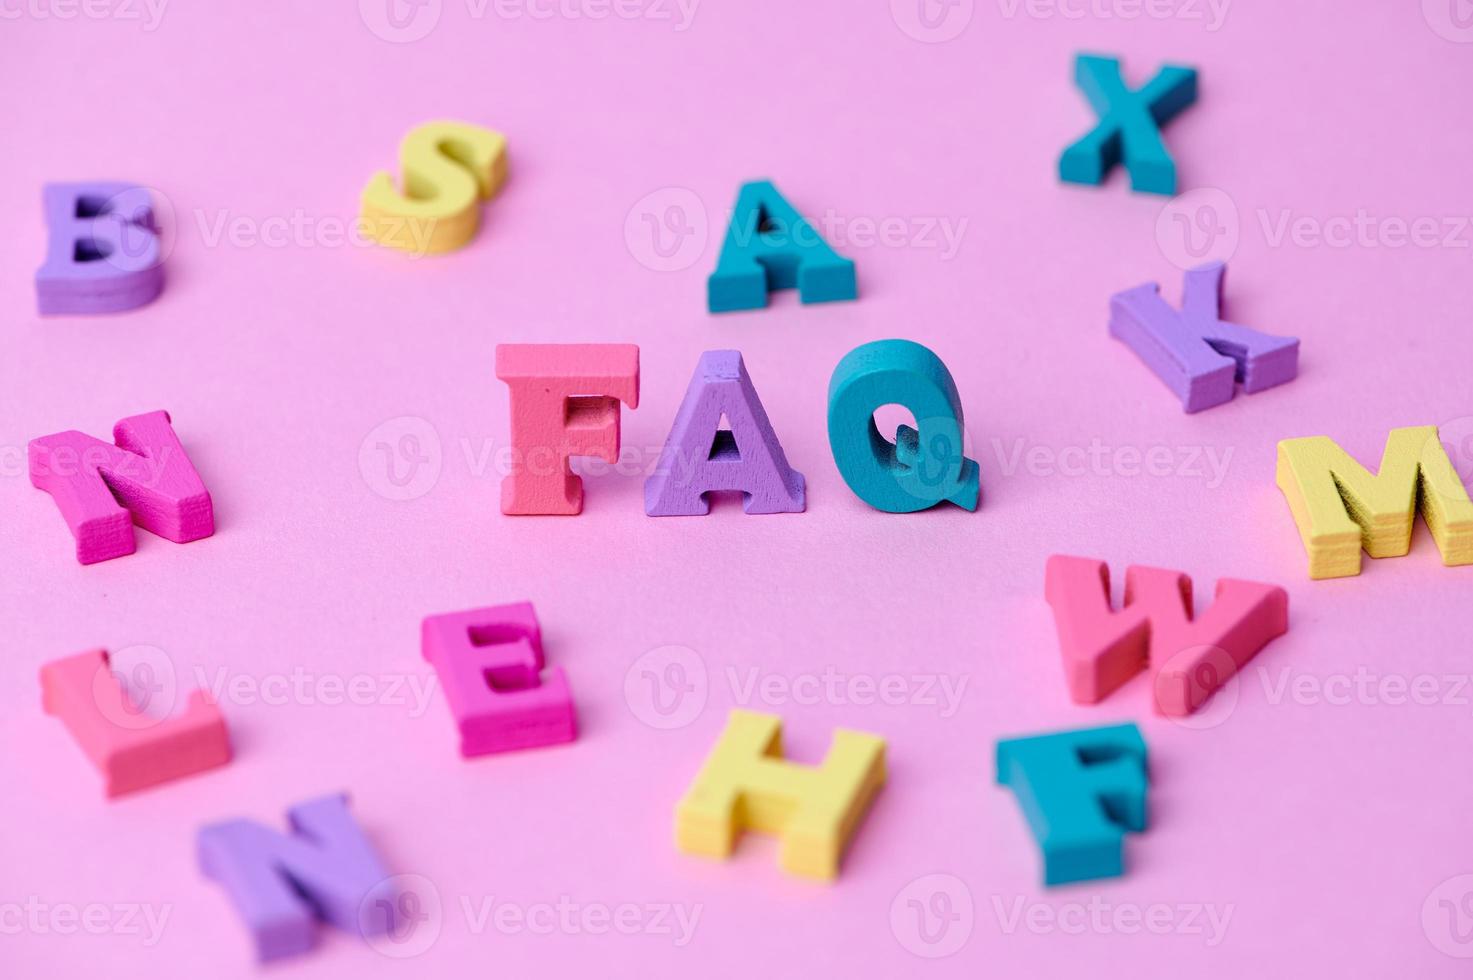 wooden colorful capital letters FAQ on pink background photo